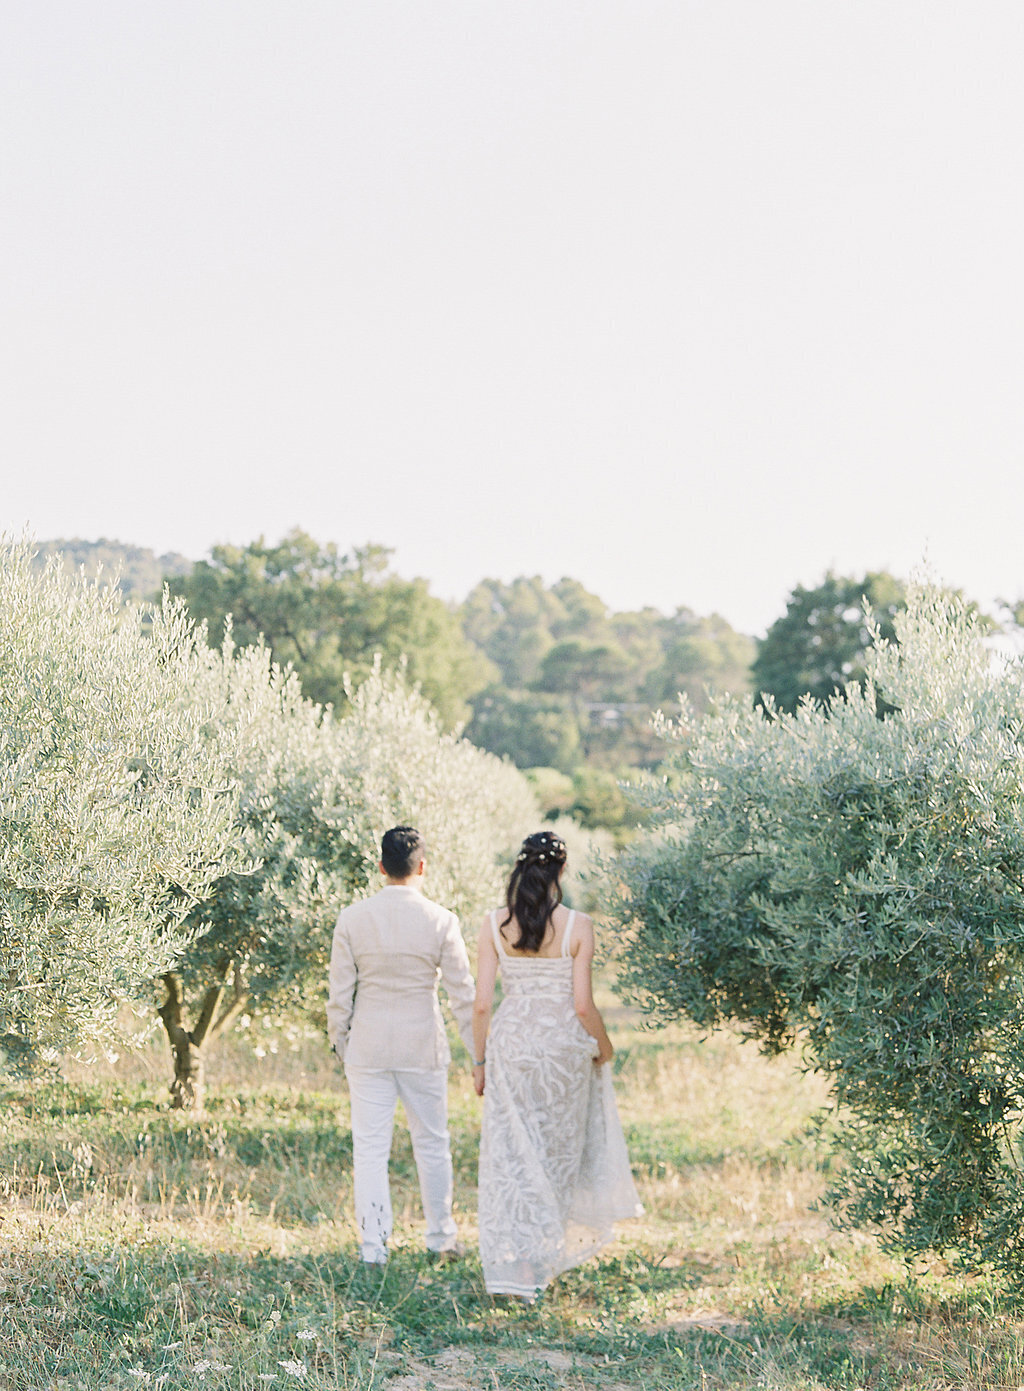 Provencal decor, wedding couple in Provence, South of France